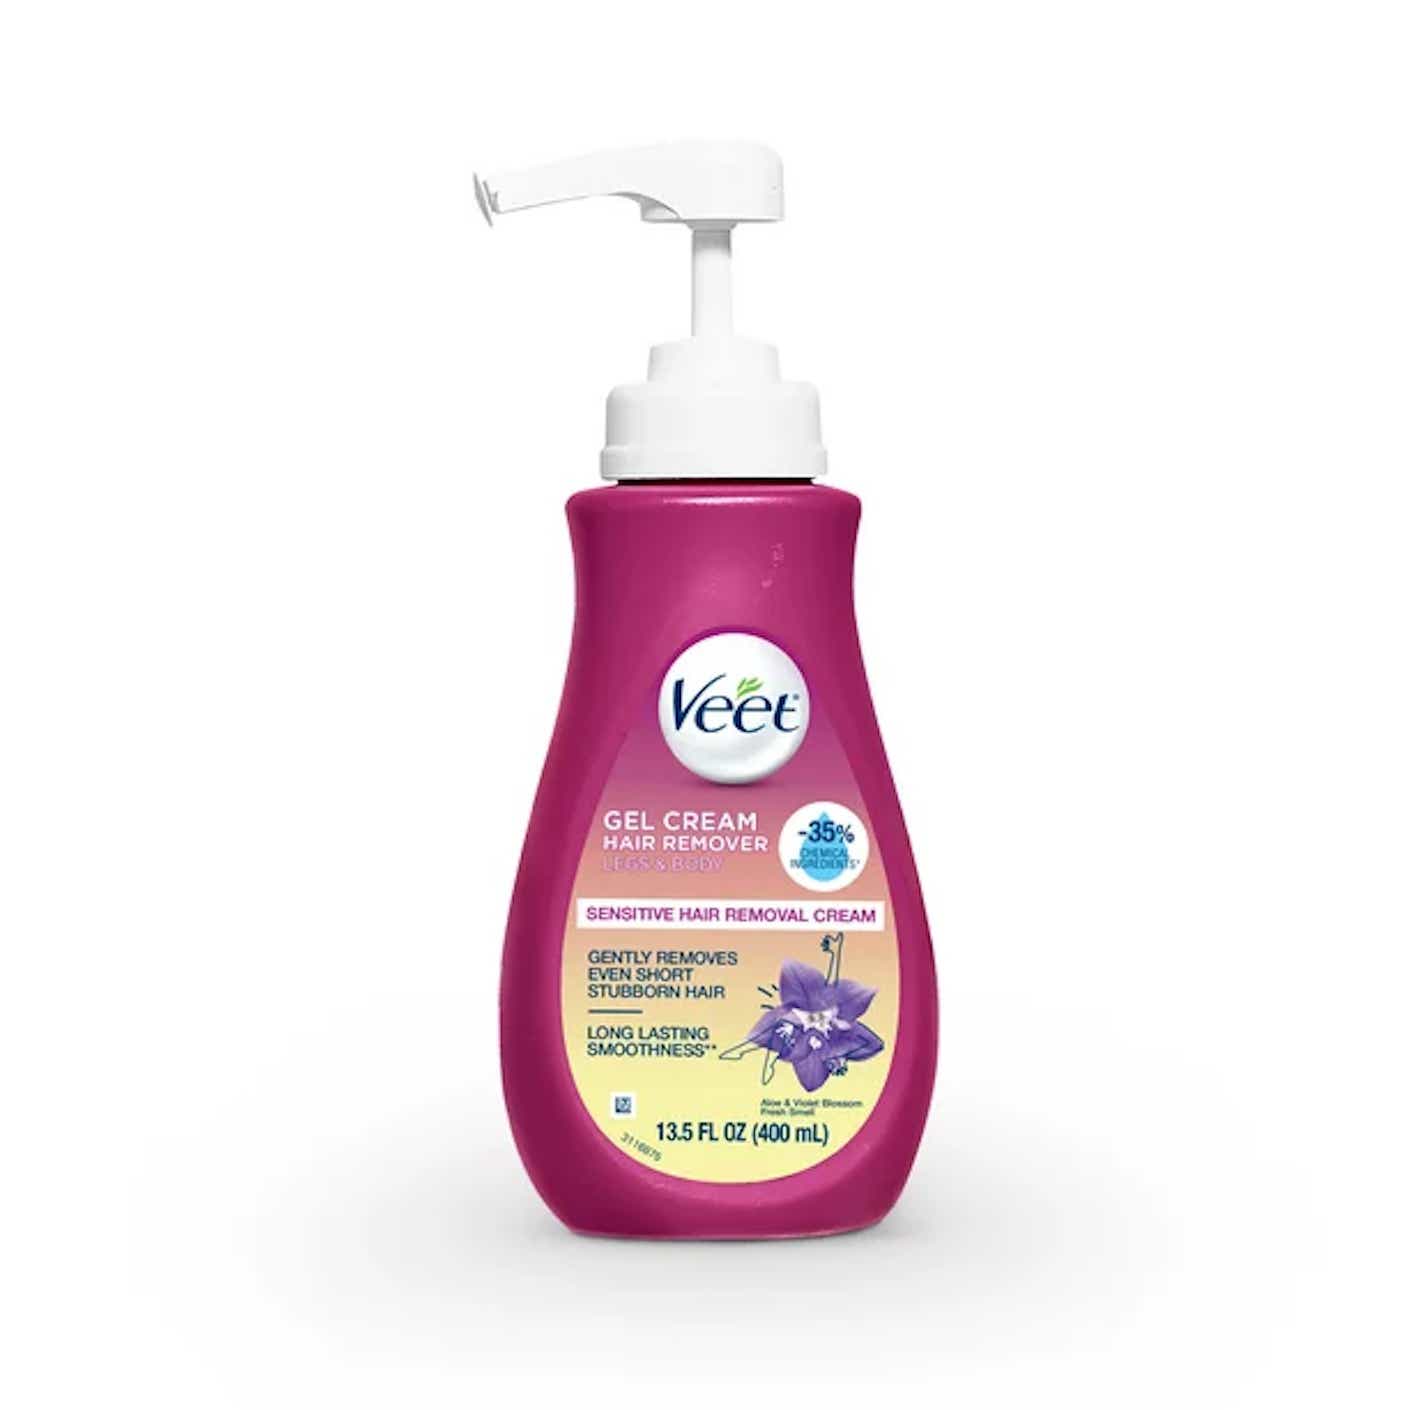 A pinkish purple plastic bottle of hair removal cream with a white pump is pictured.